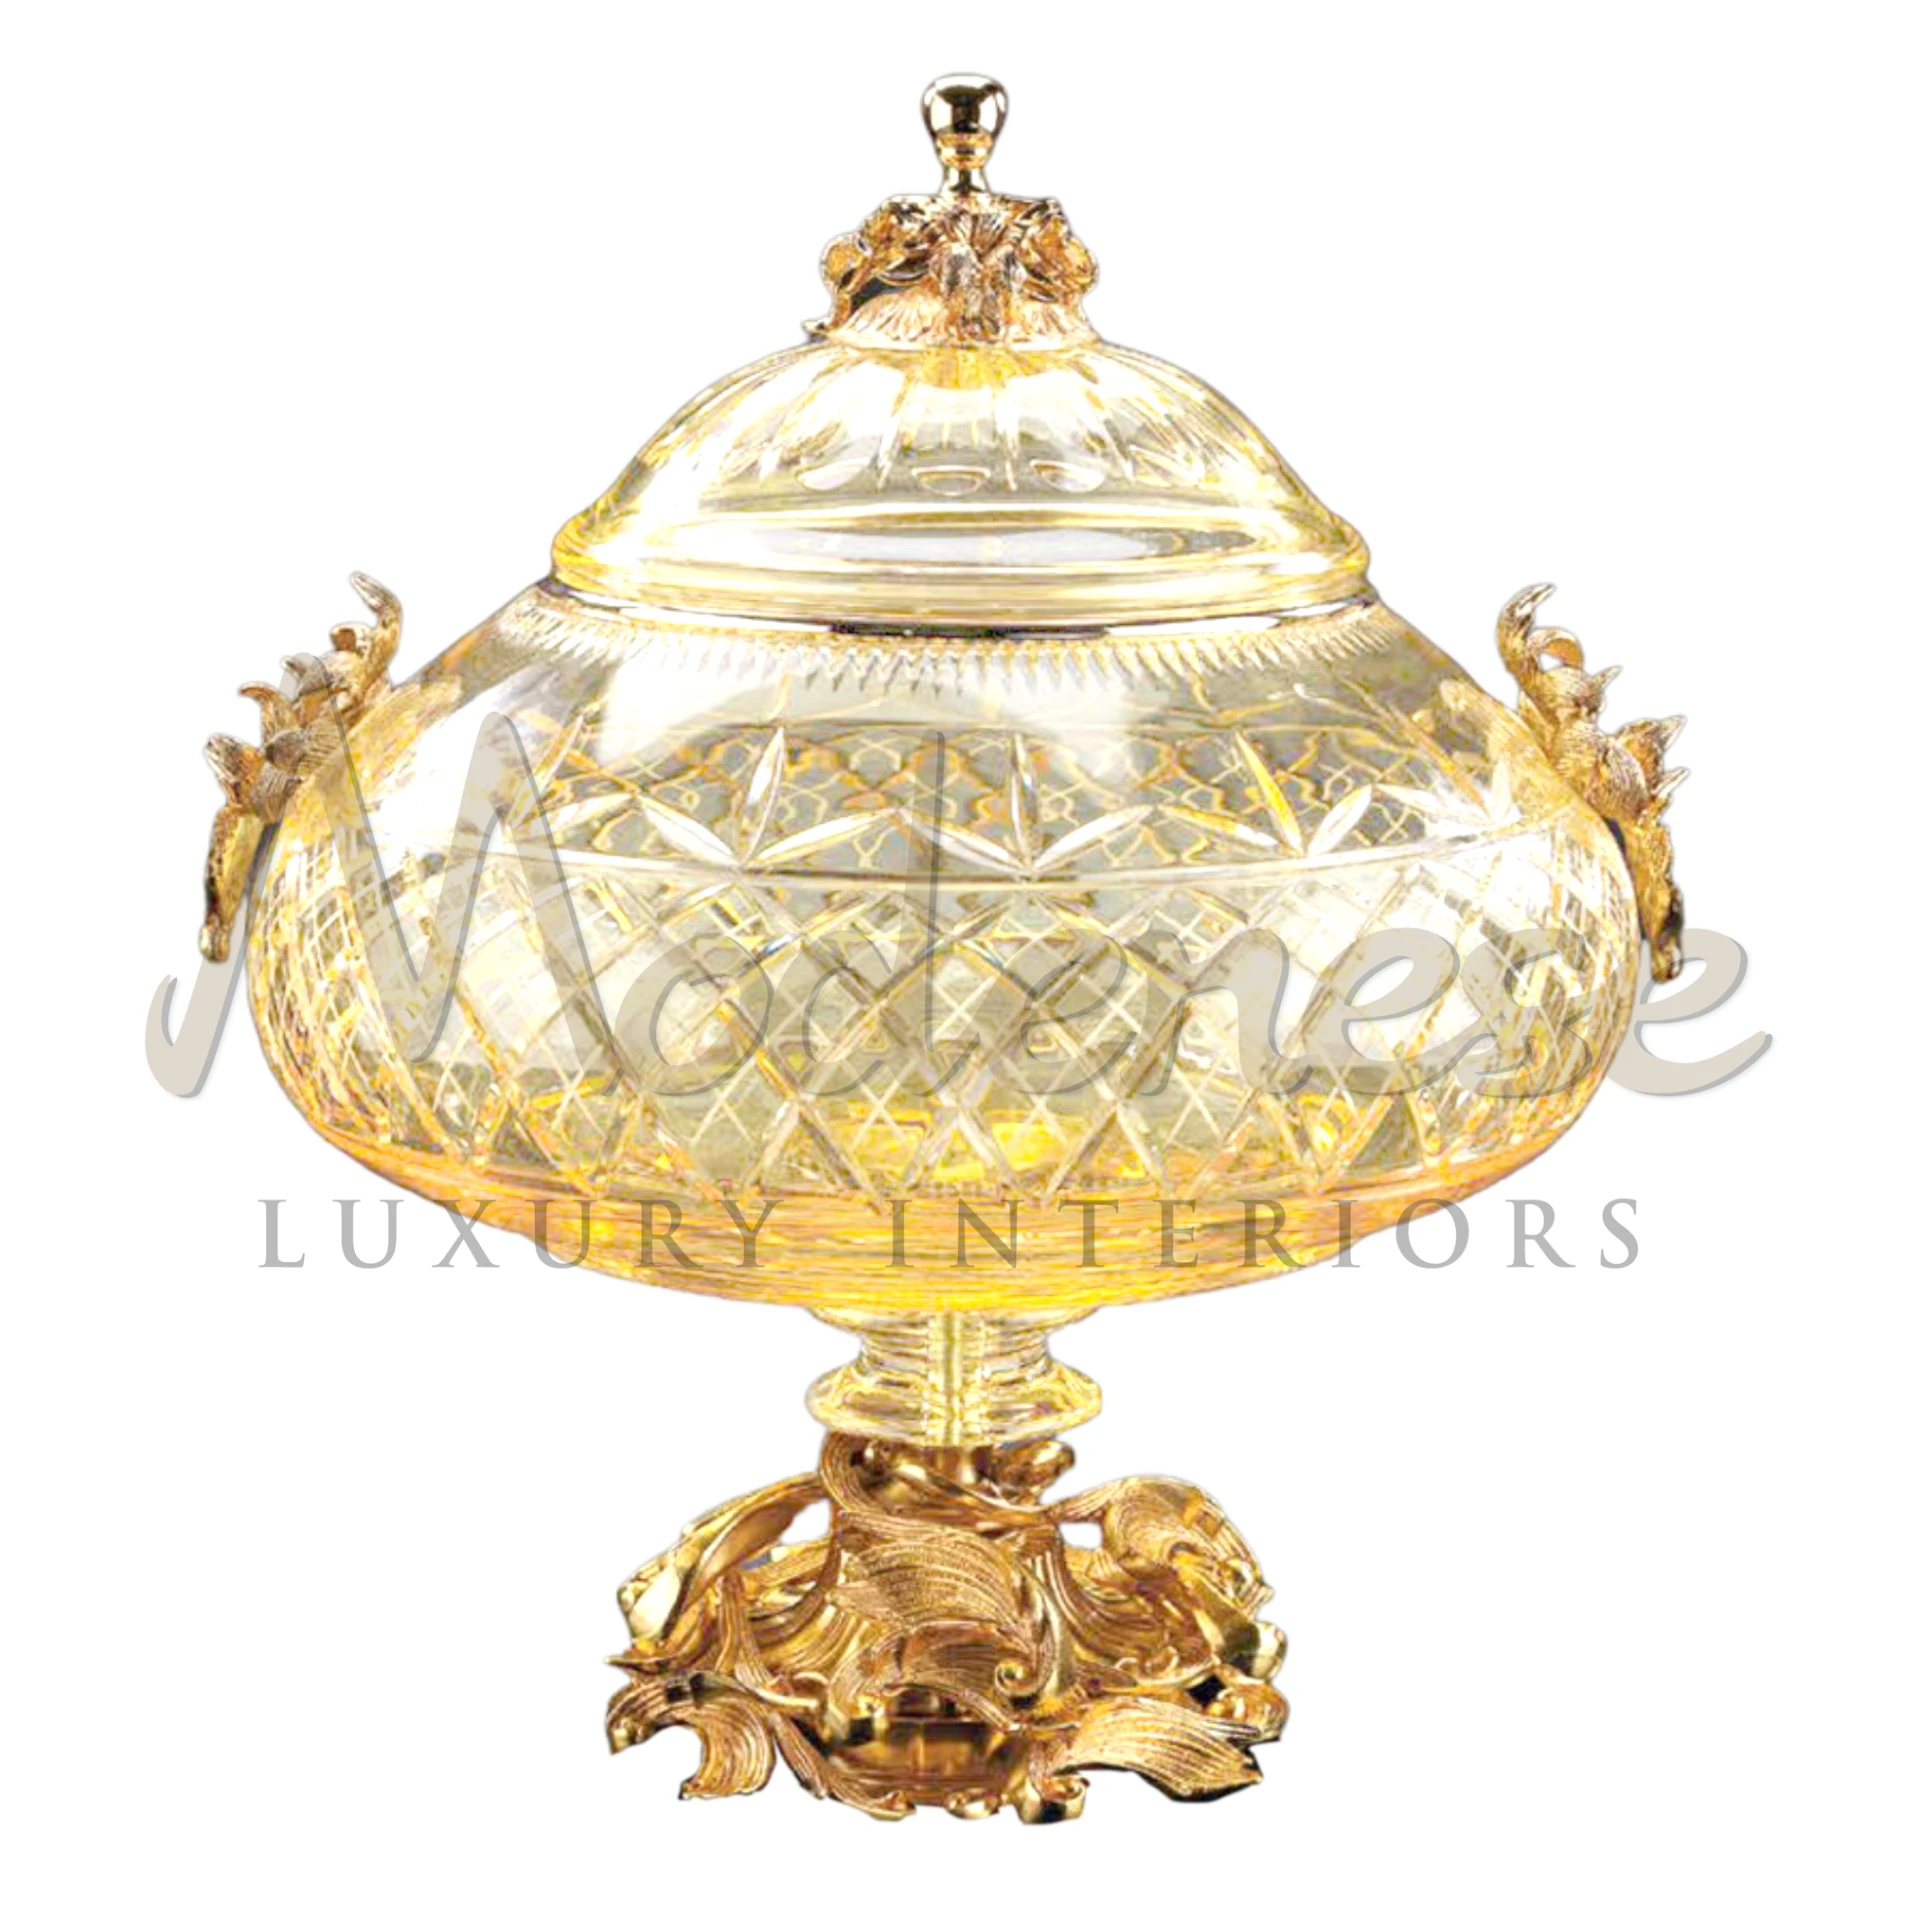 Luxury Wide Yellow Glass Bowl, ideal for centerpieces or displaying items, adds warmth and vibrancy with its high-quality craftsmanship and design.